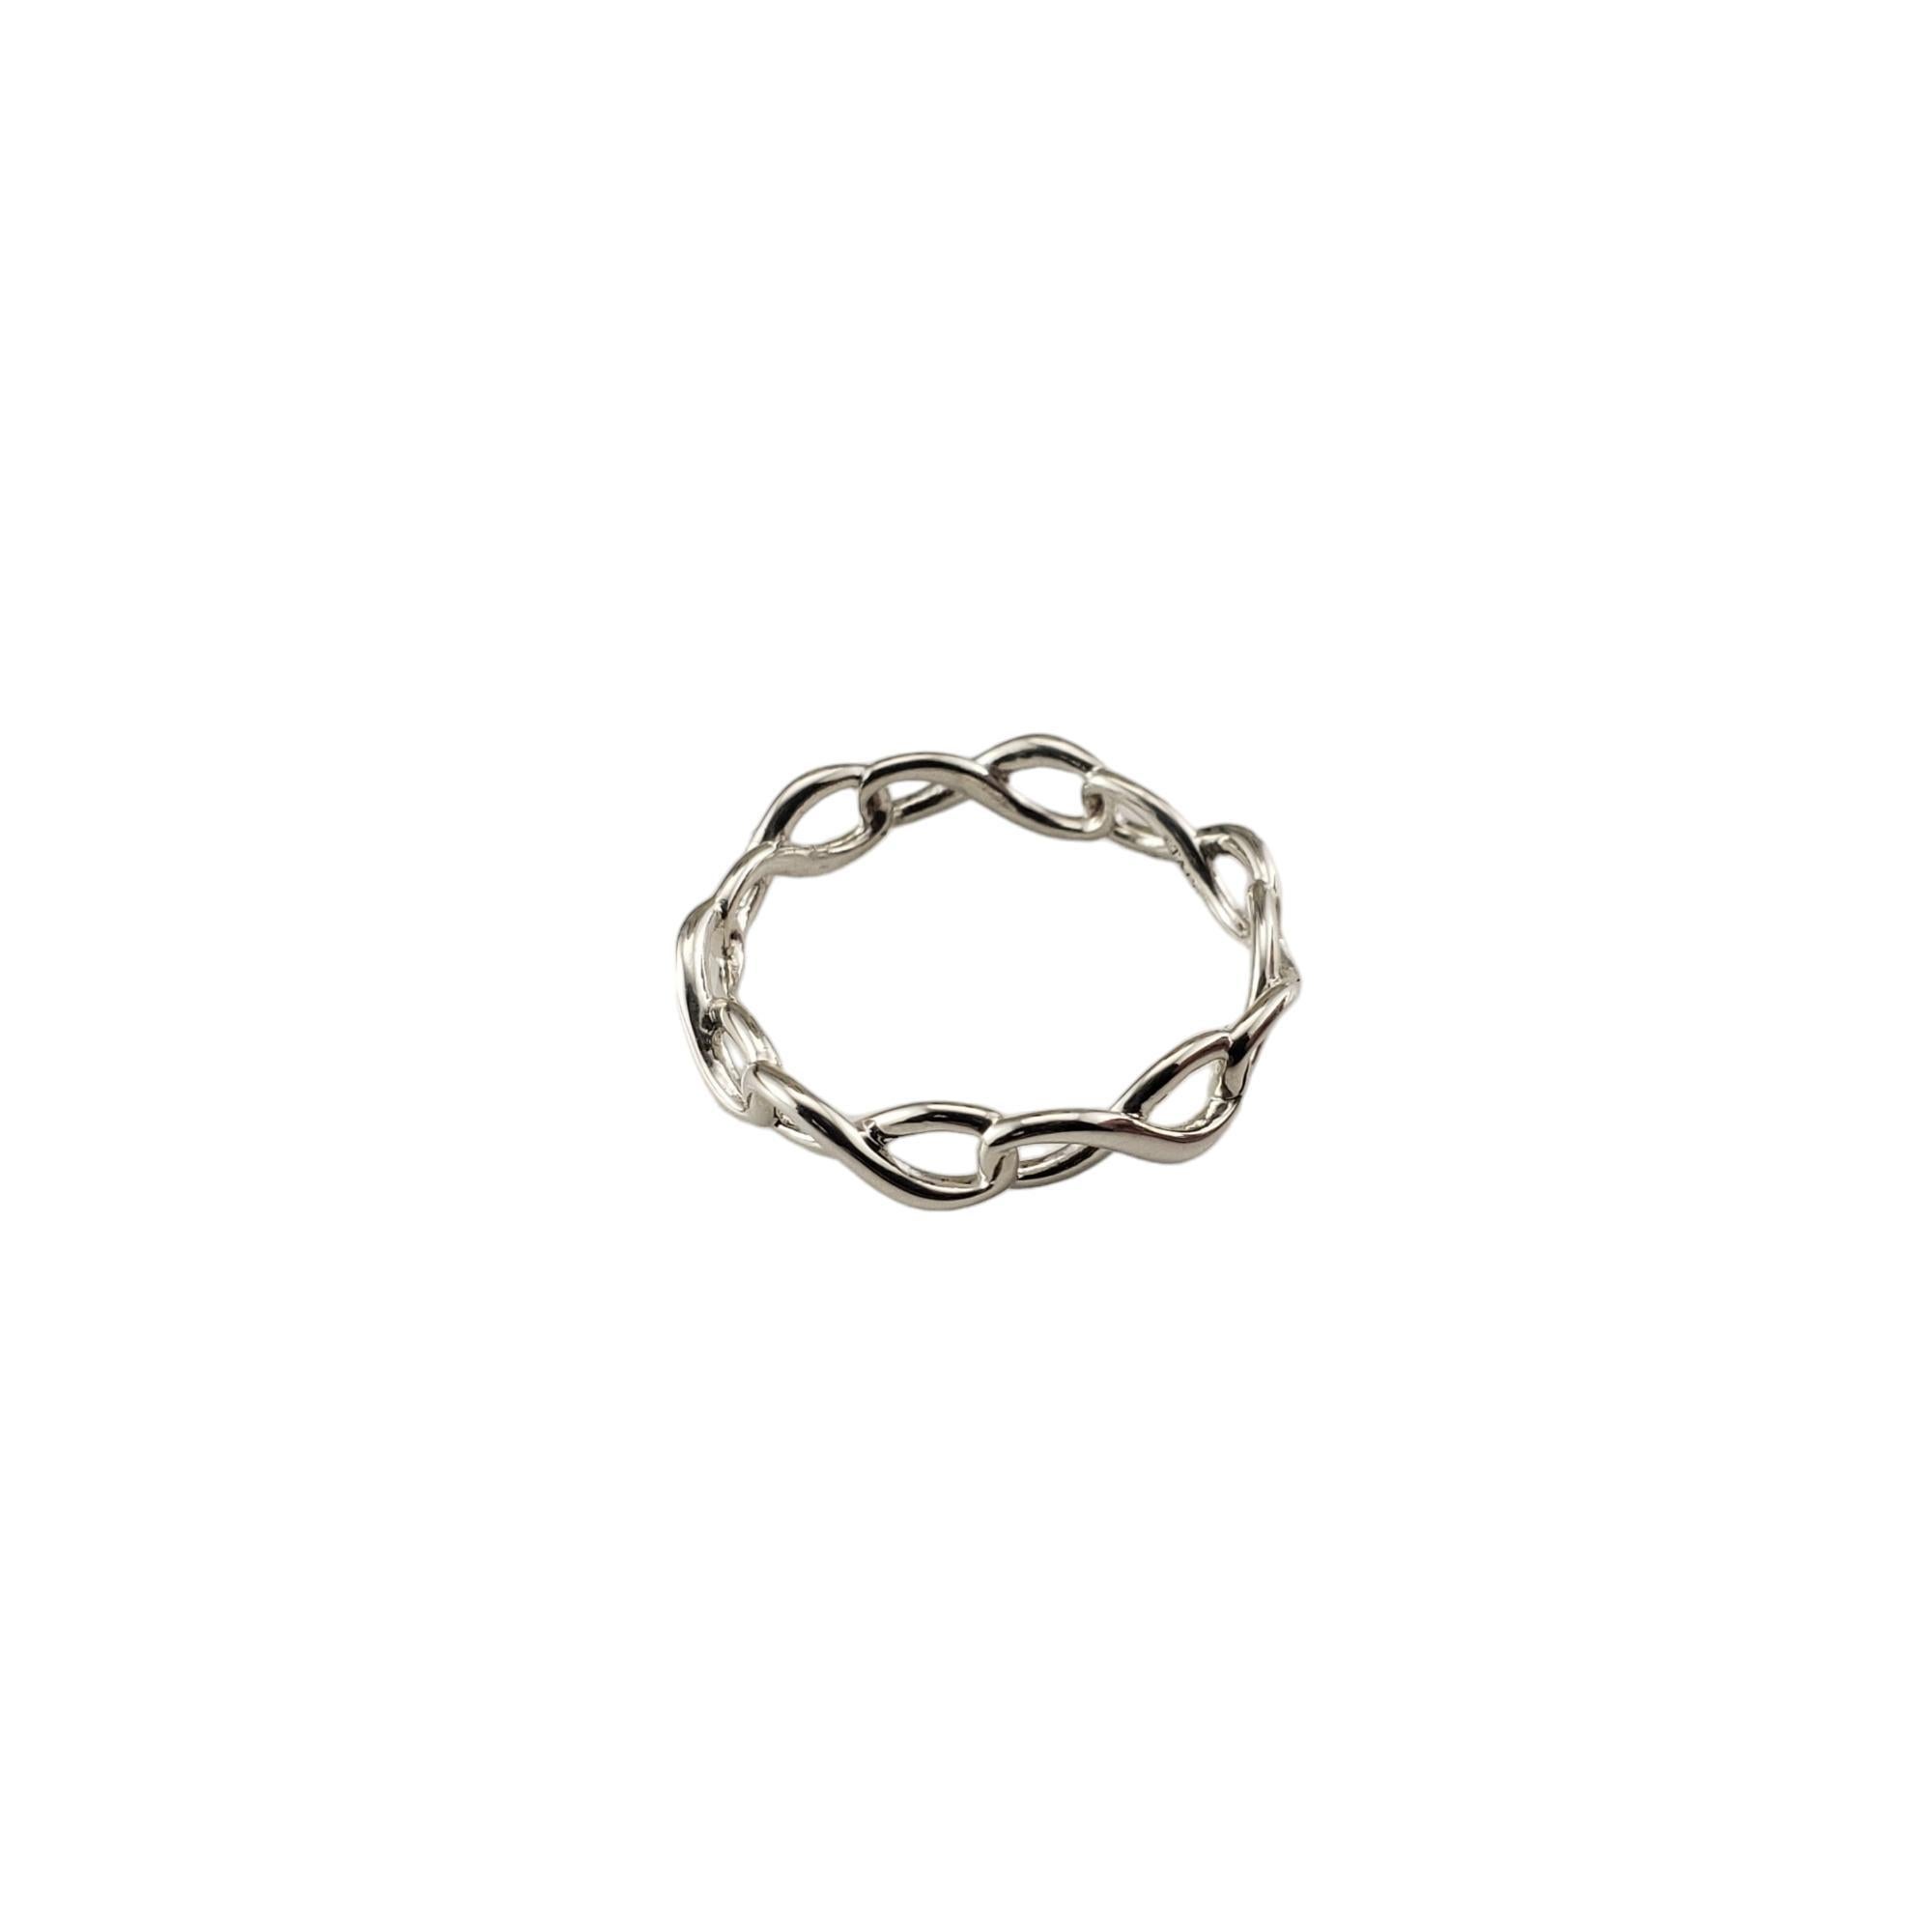 Tiffany & Co. Sterling Silver Infinity Band Ring Size 8-8.25 #16244 1